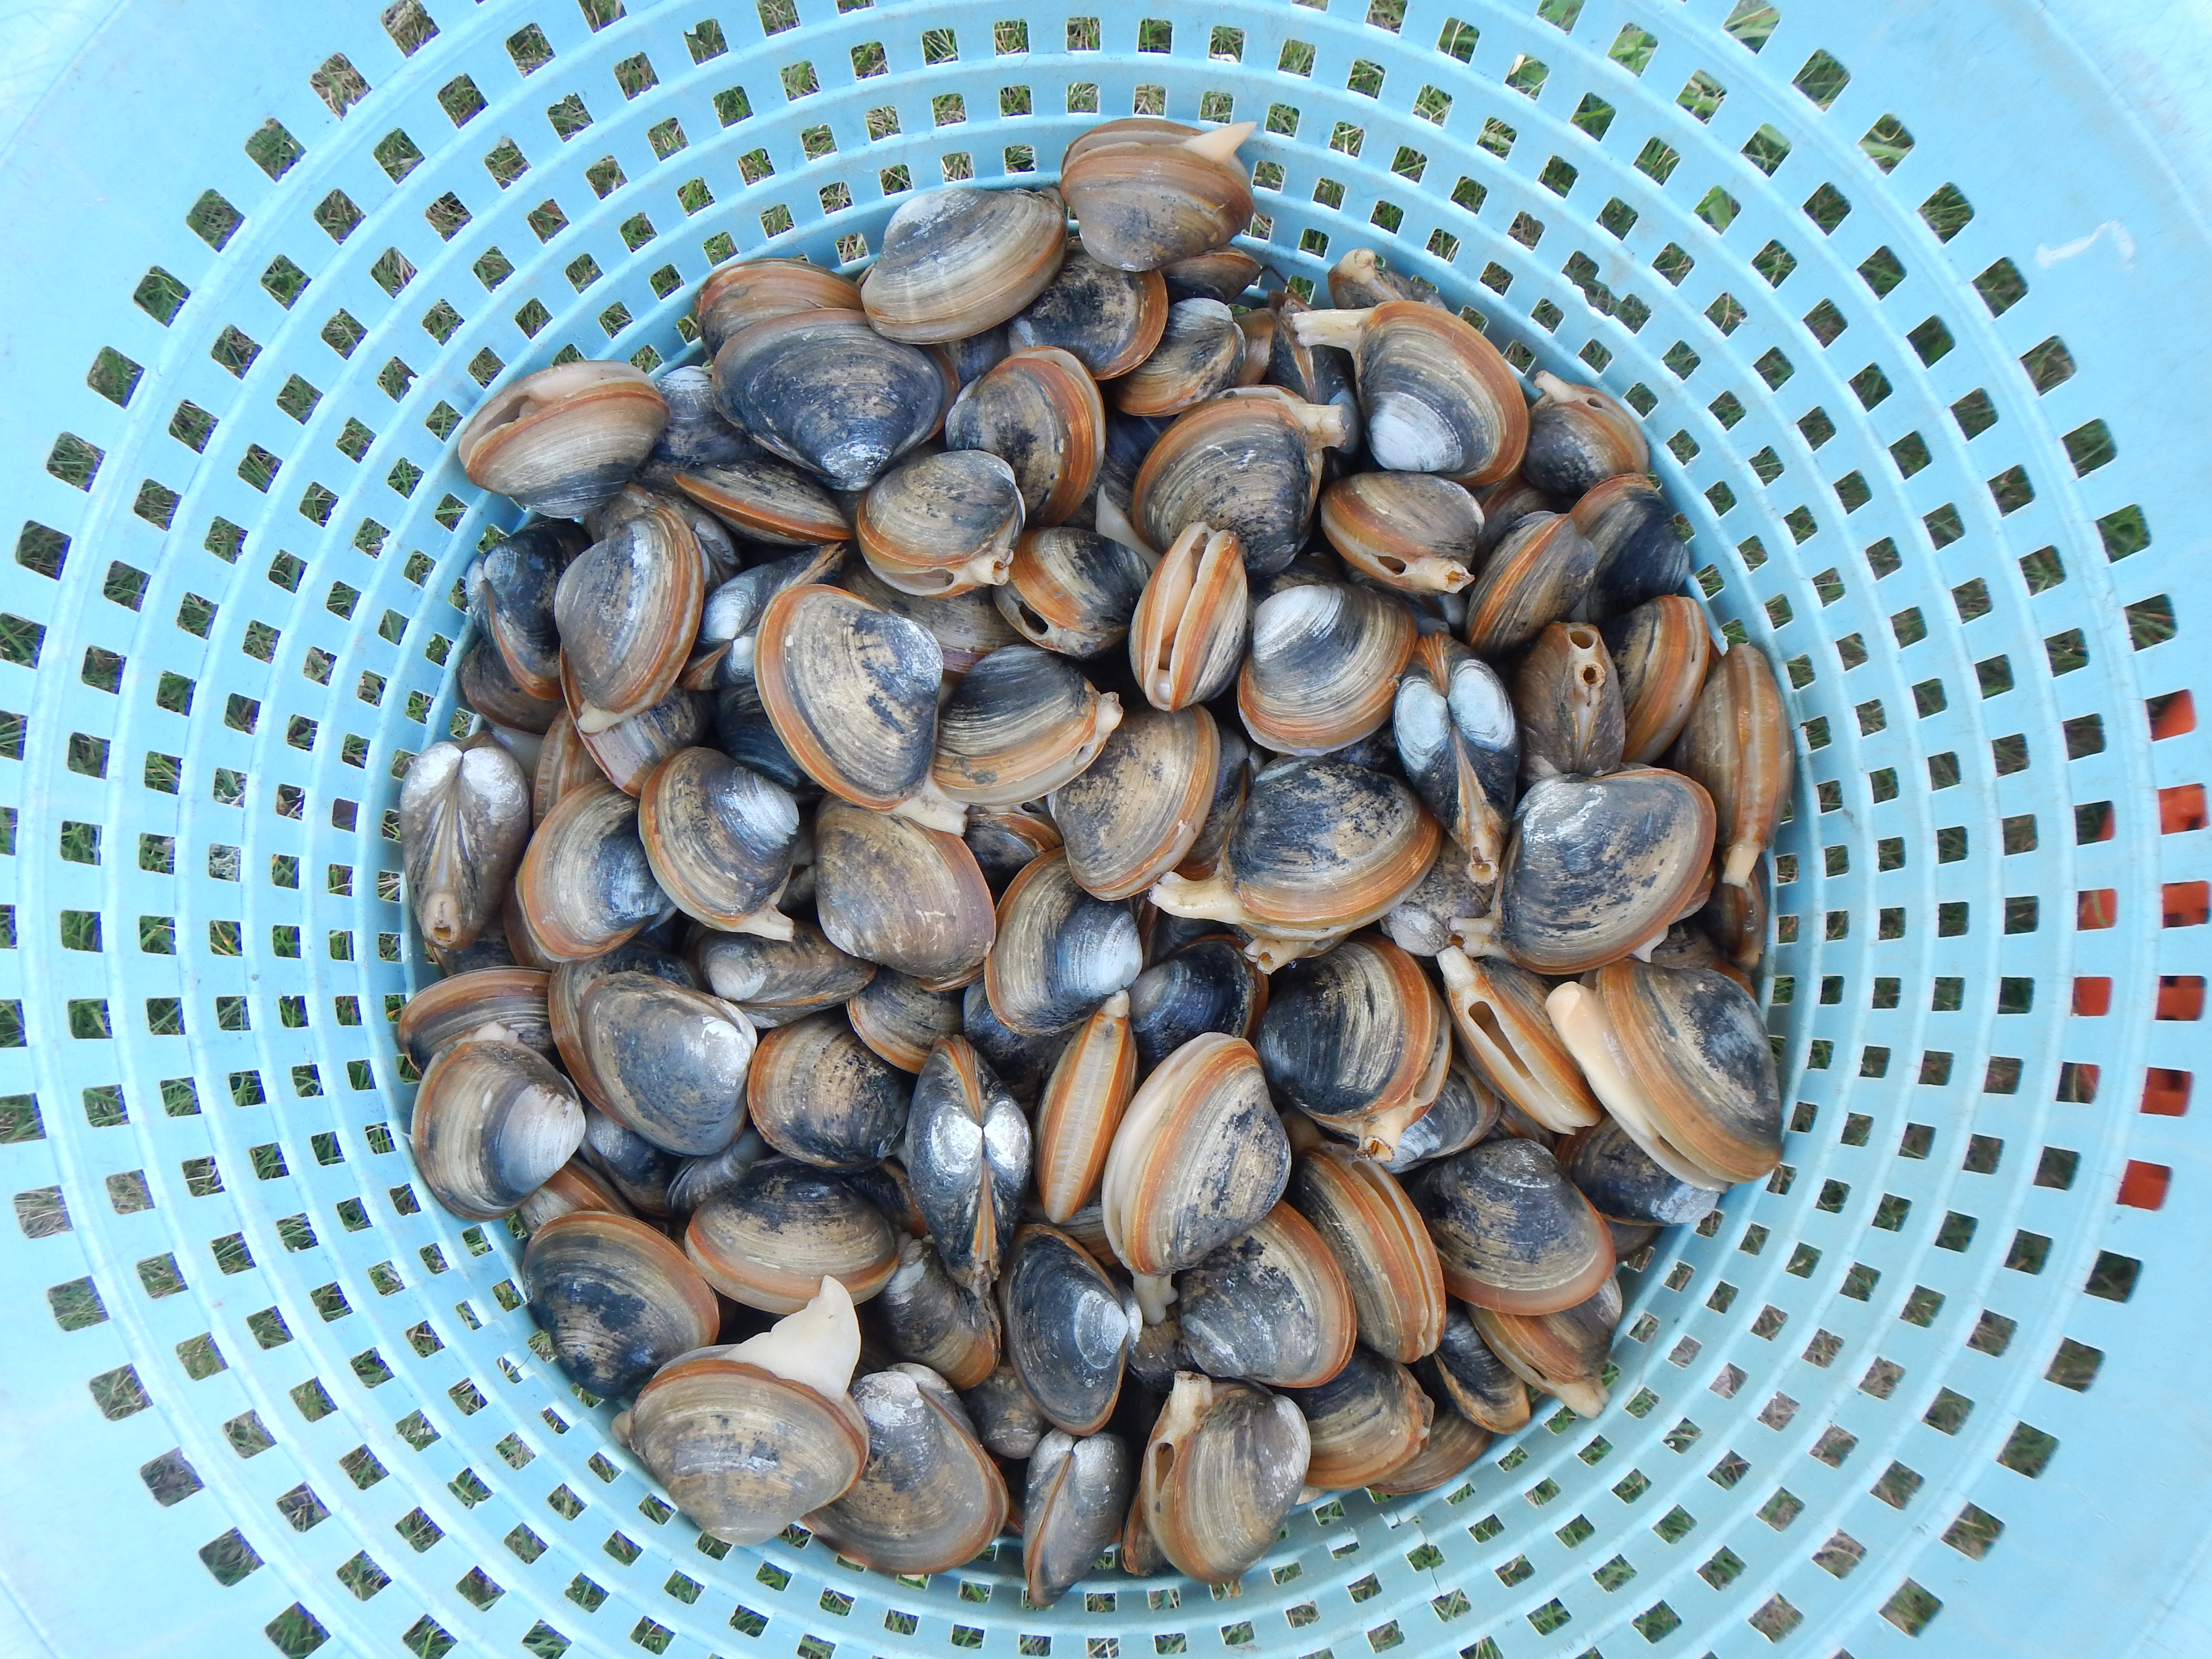 15. This is the goal of the project – to assist the shellfish farmers of Massachusetts to harvest beautiful, tasty, nutritious shellfish from their grants.